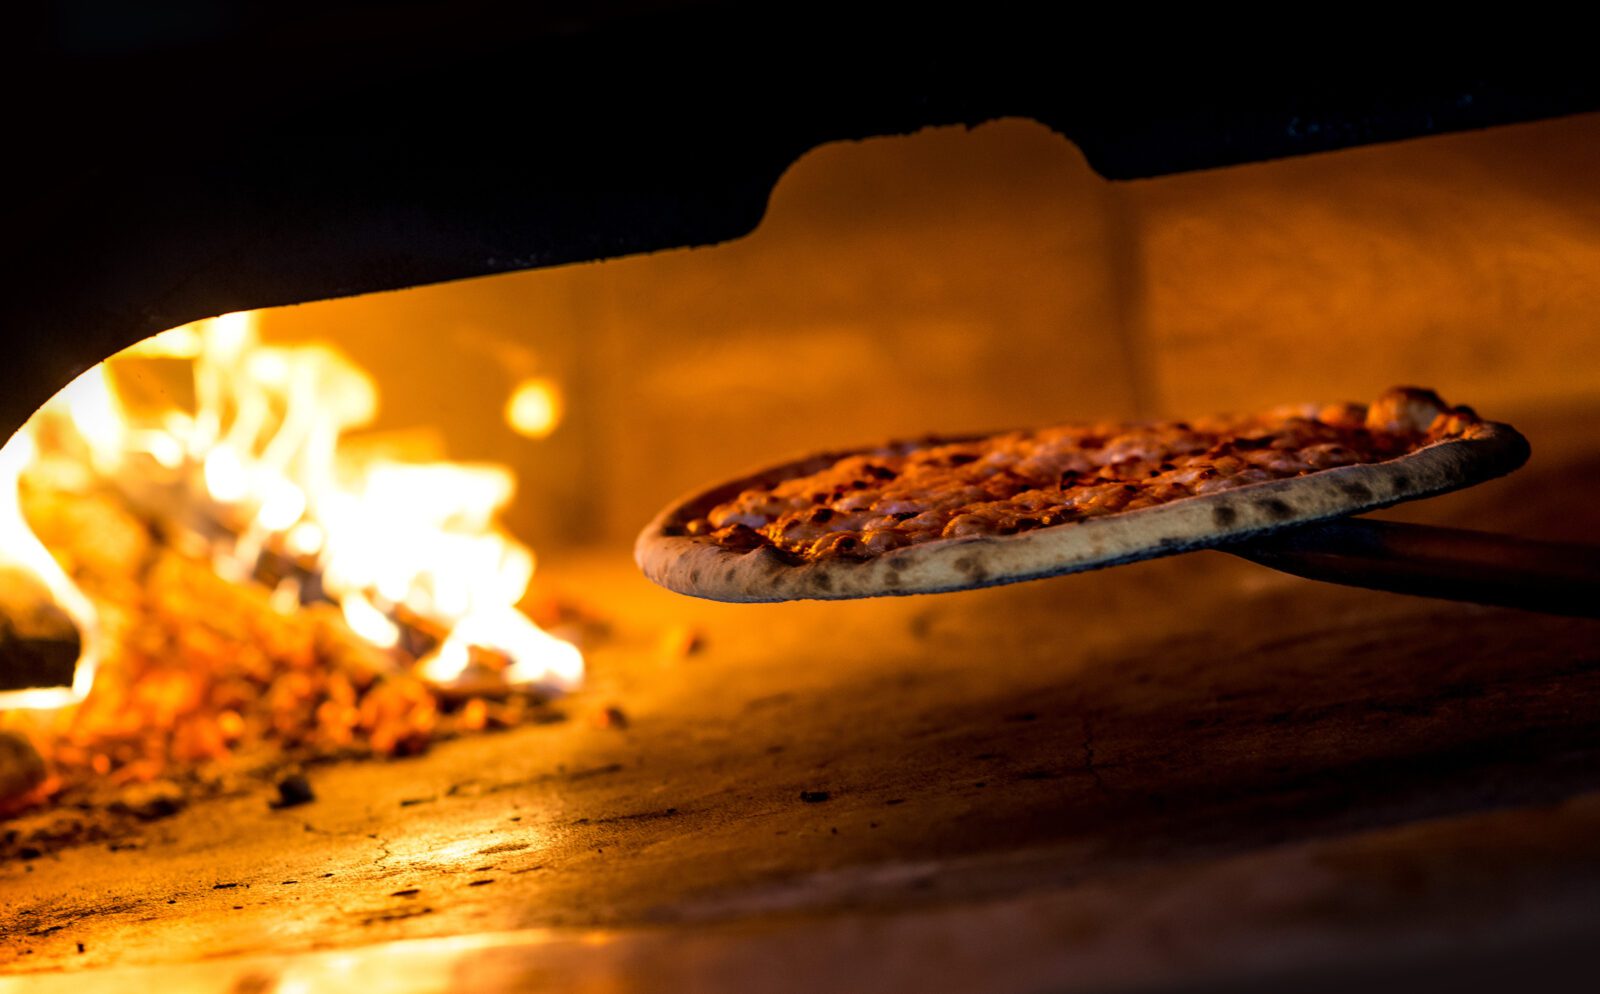 A pizza is removed from a wood burning oven in a classic Italian restaurant